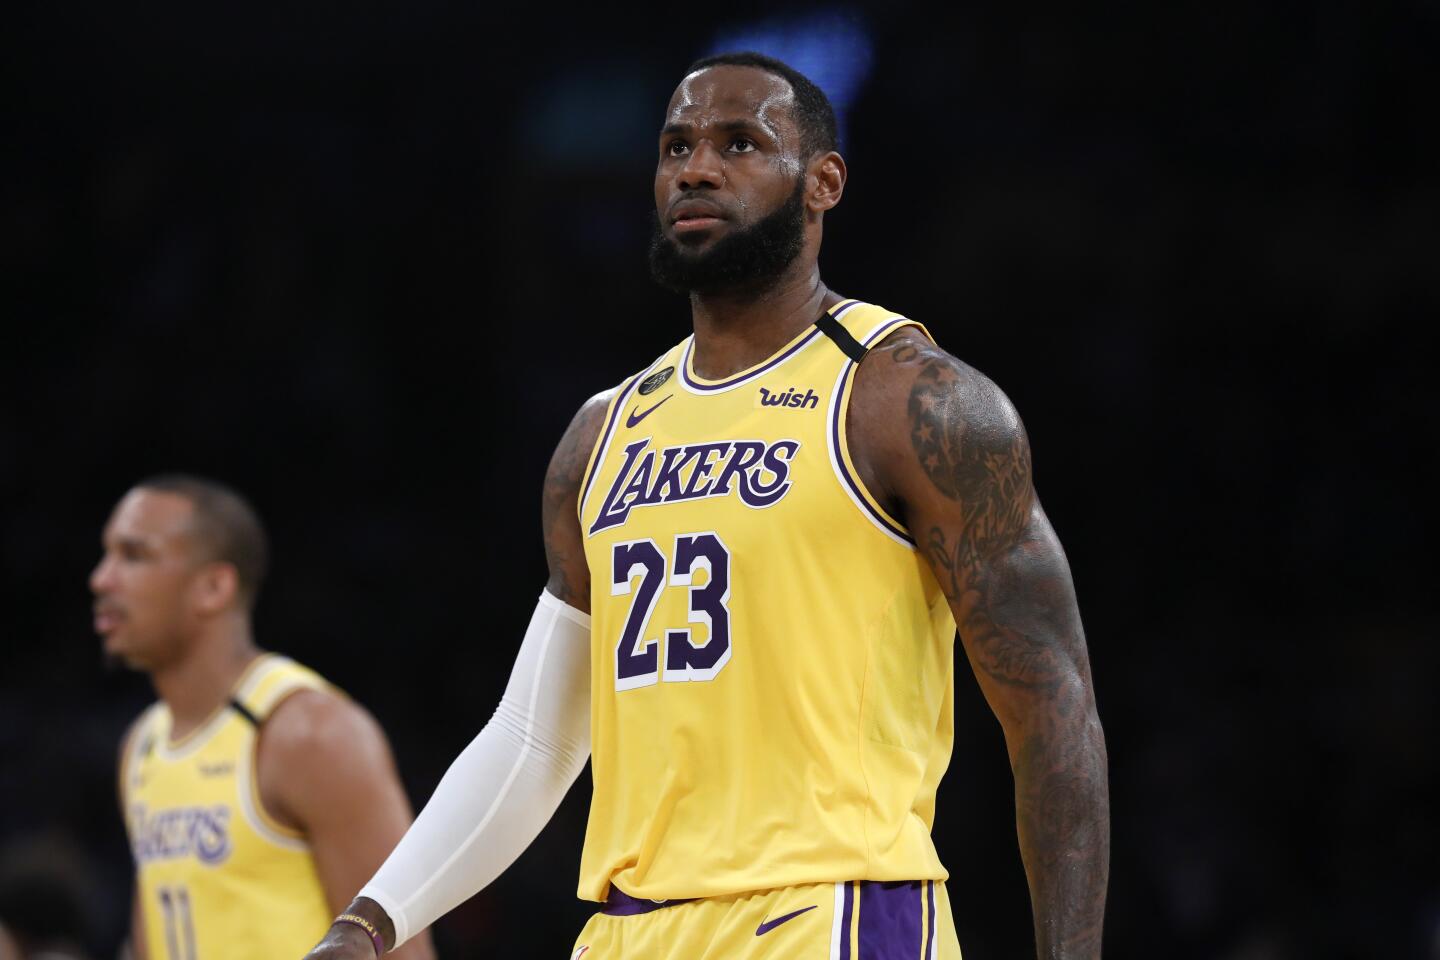 LeBron James looks on during the first half of a game March 6 against the Bucks at Staples Center.